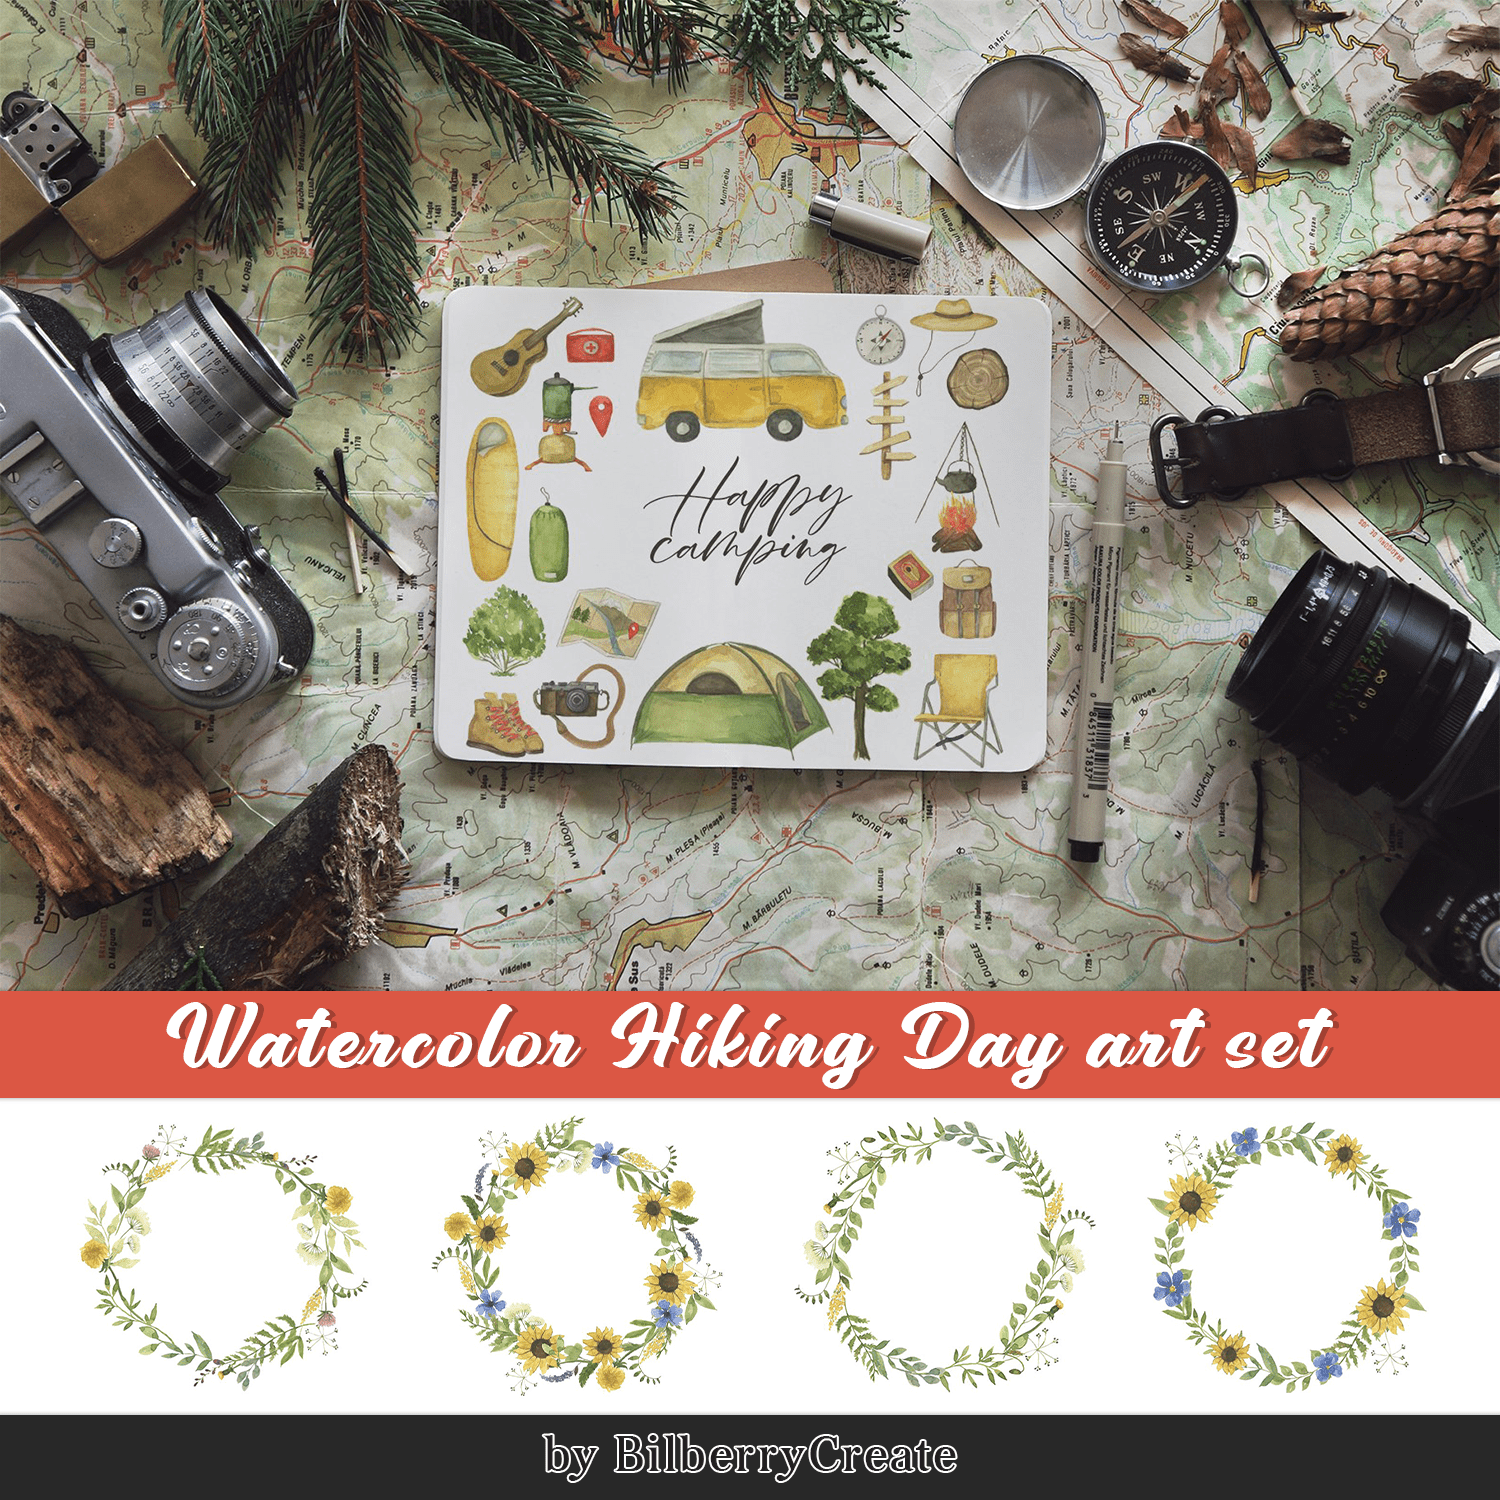 Watercolor Hiking Day art set cover.